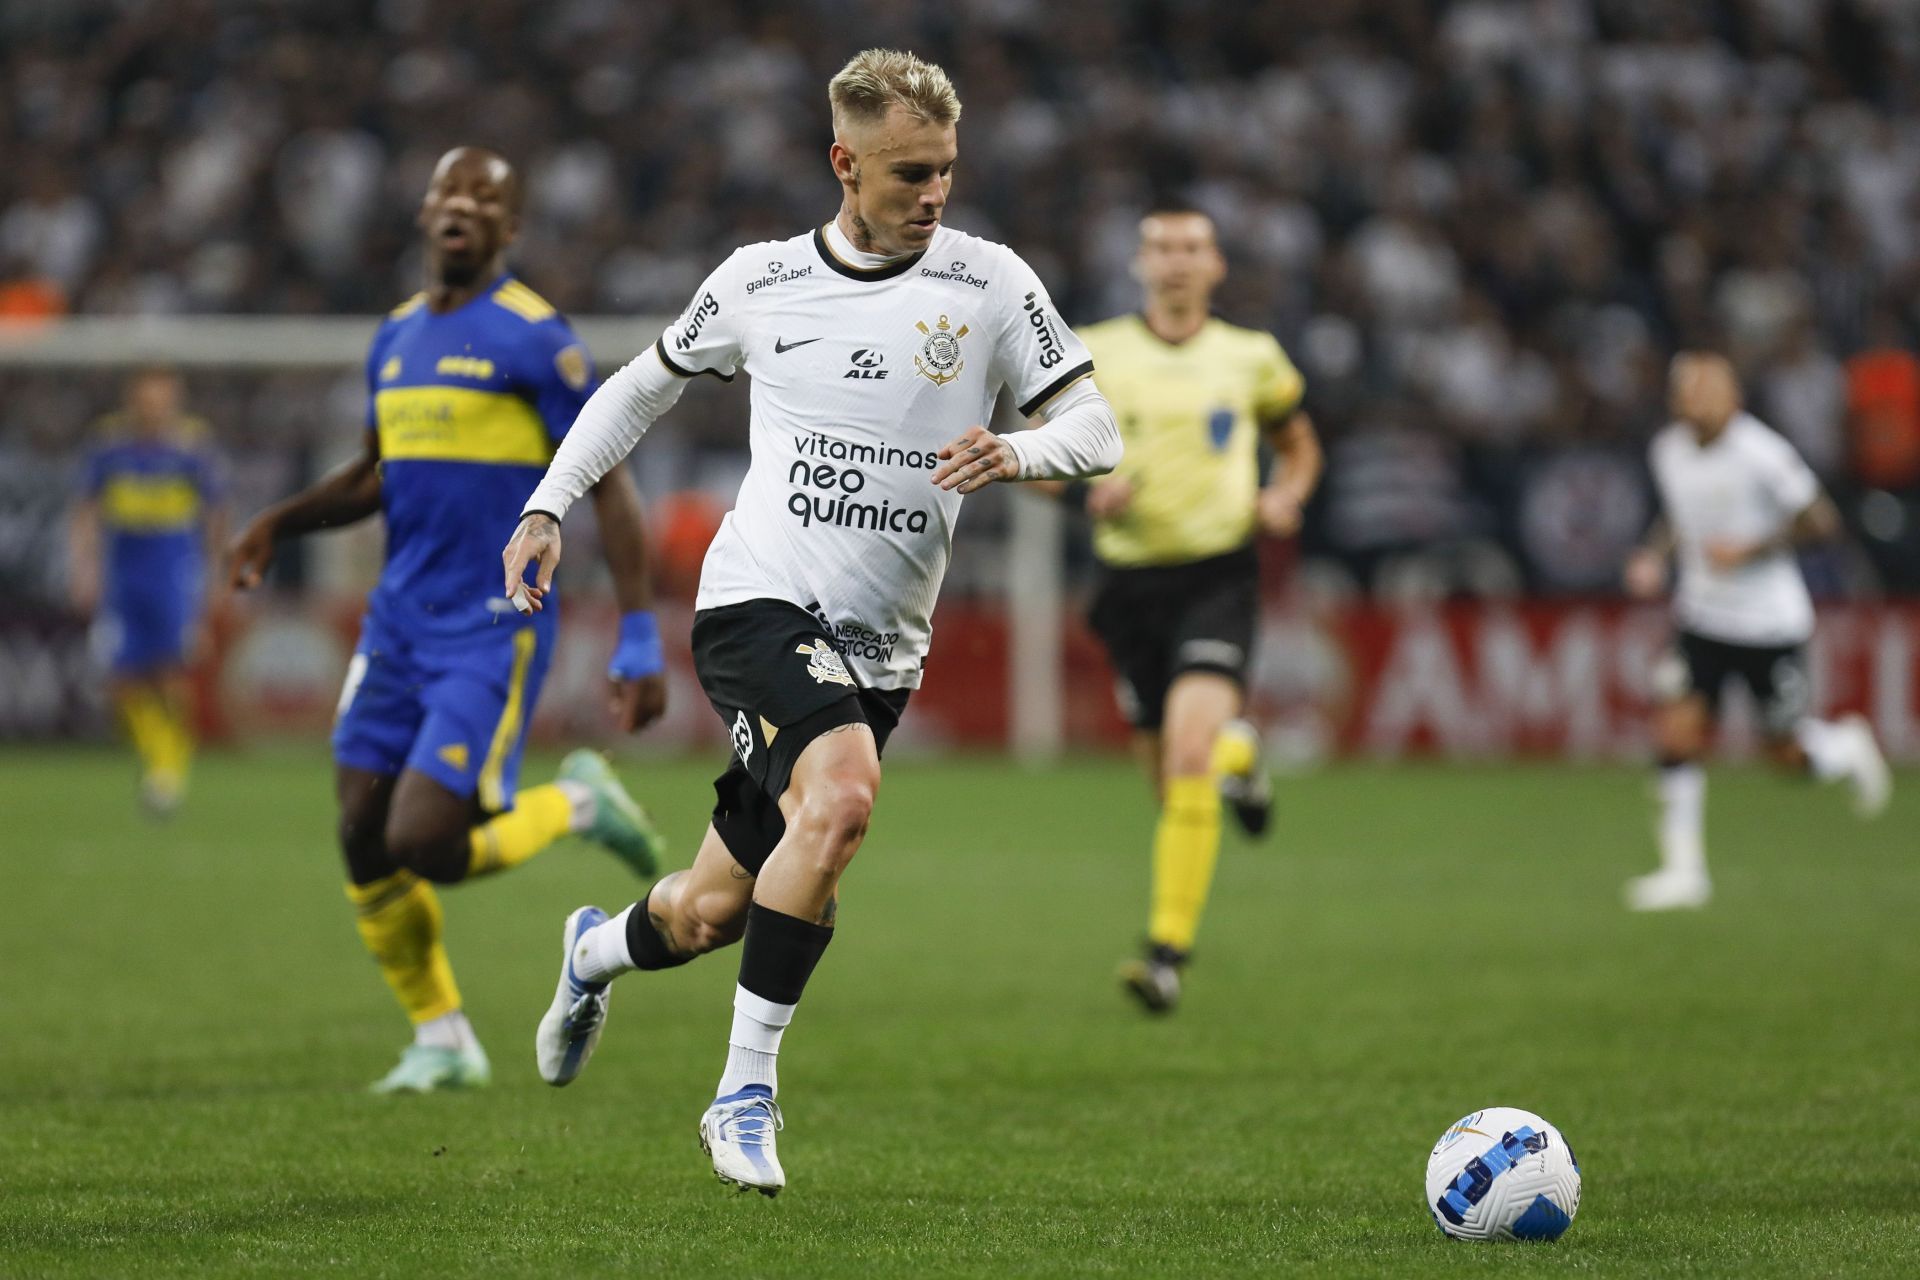 Corinthians and Boca Juniors square off in their Copa Libertadores fixture on Tuesday